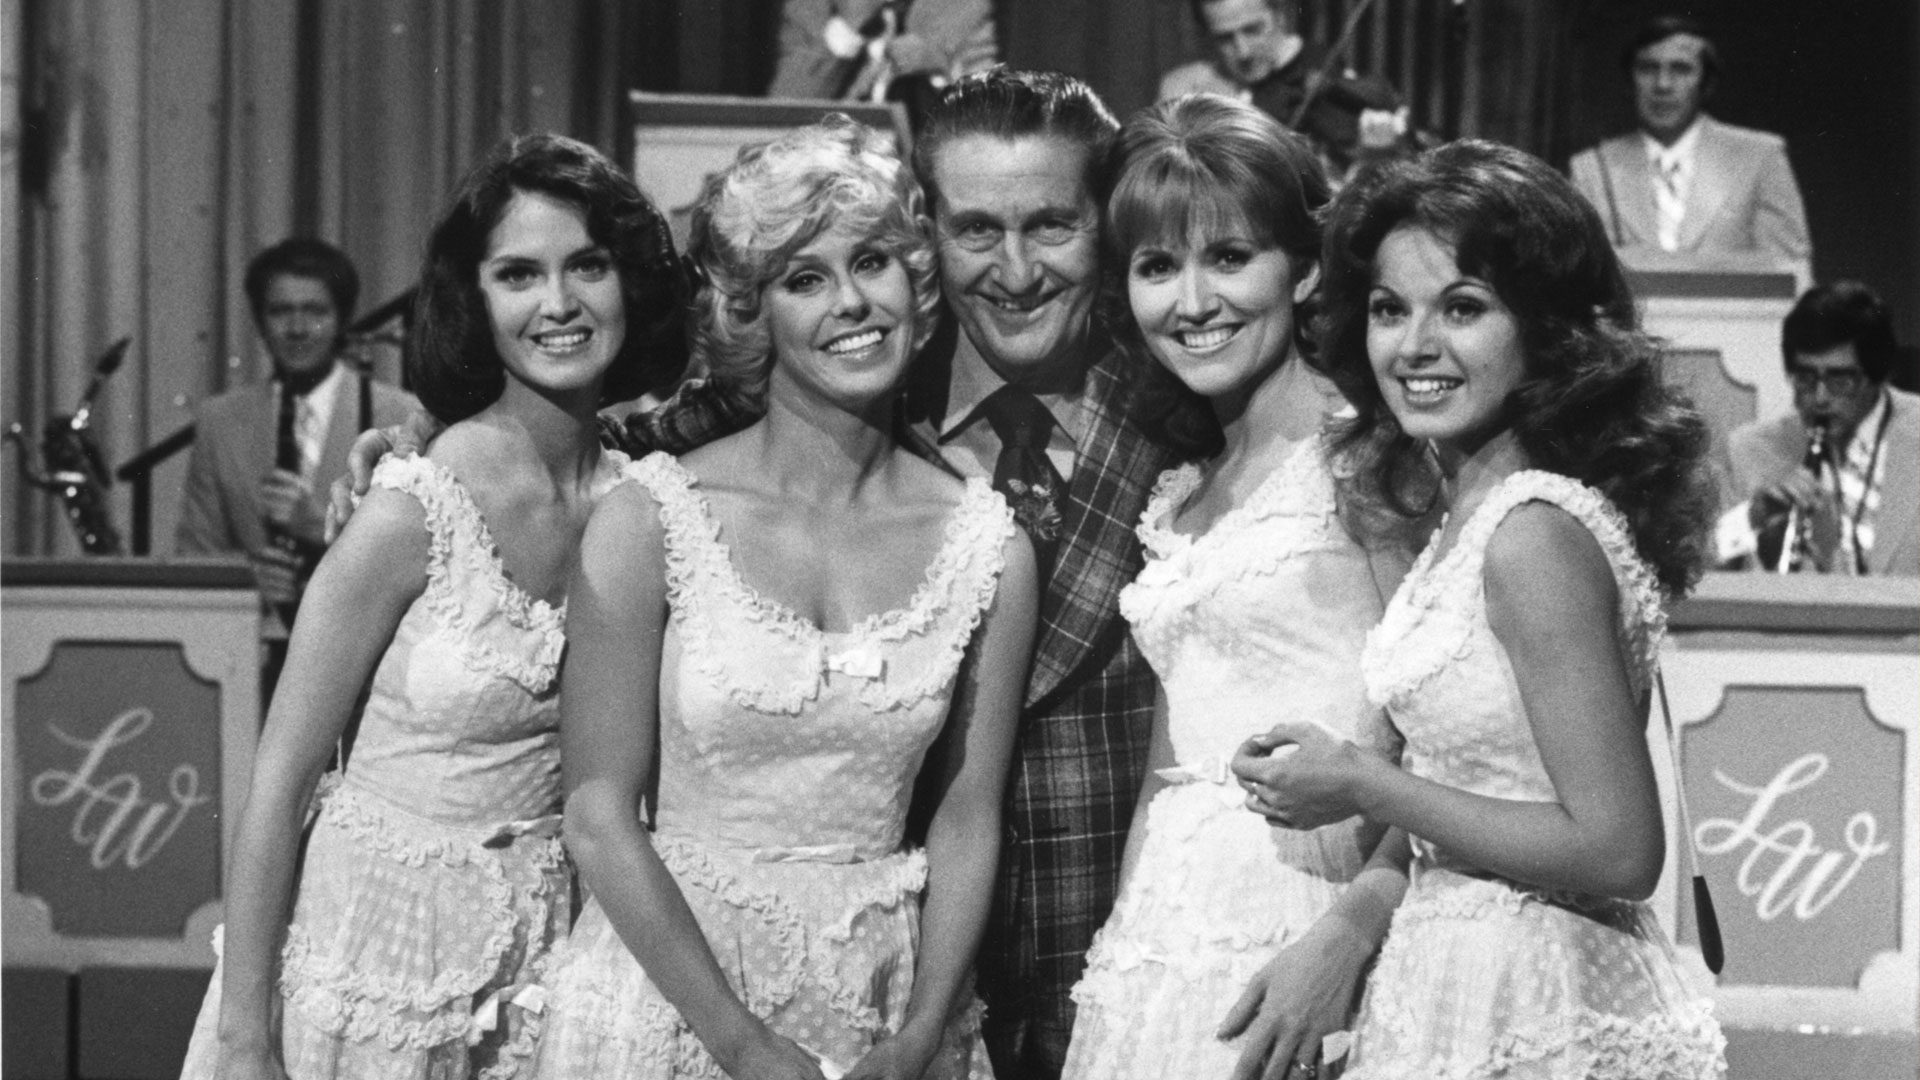 Lawrence Welk Show. 